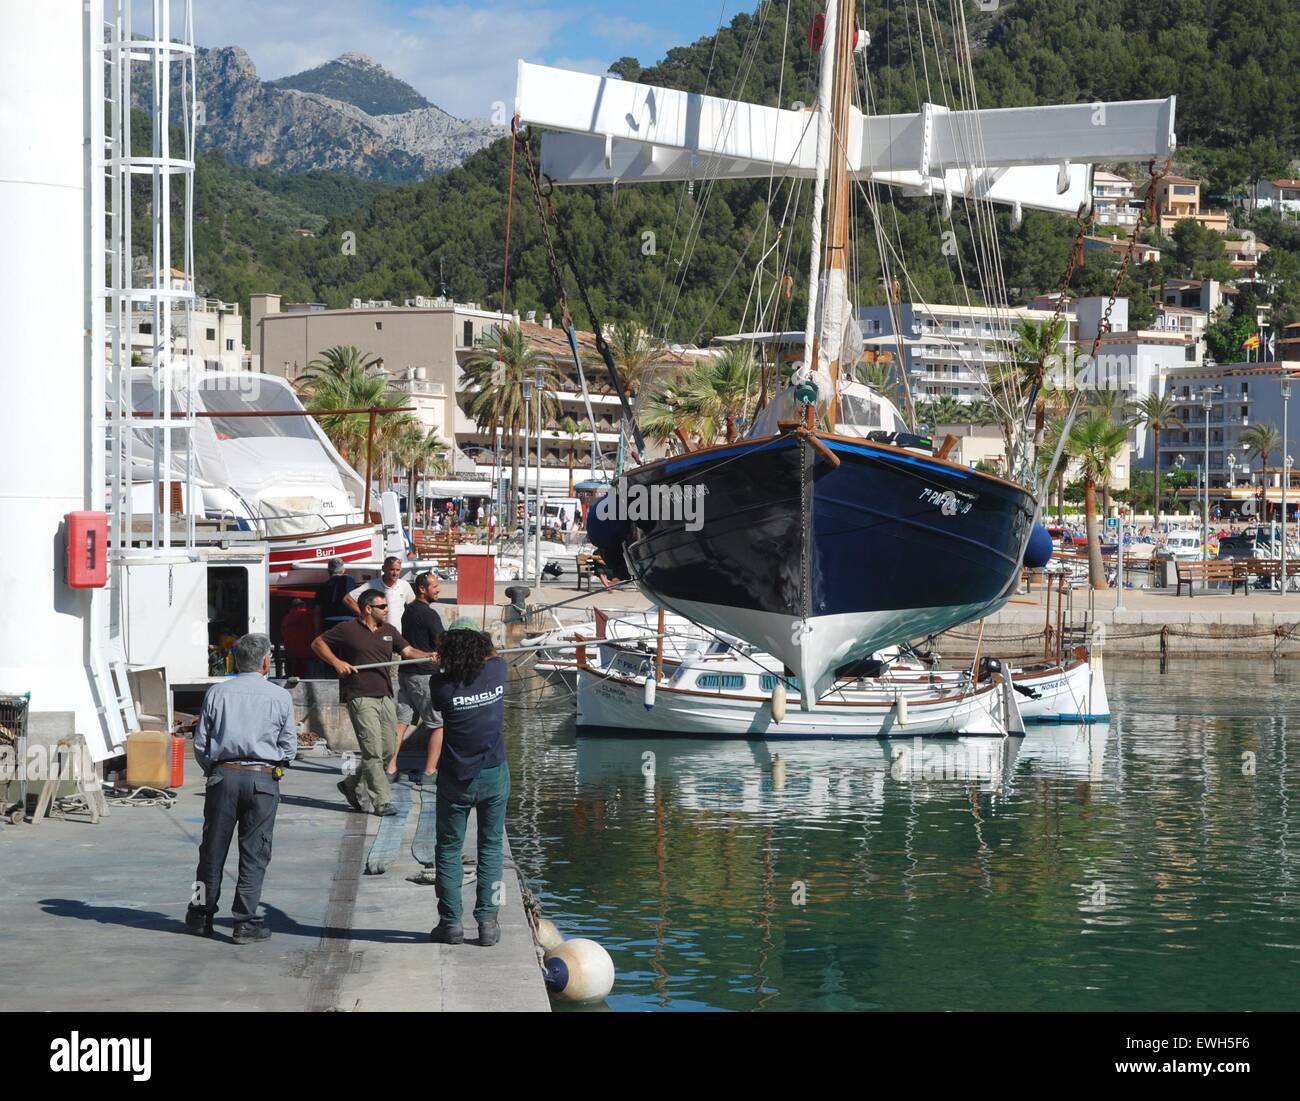 Boat launch. Launching a boat into the water from a rig, Mallorca, Spain Stock Photo